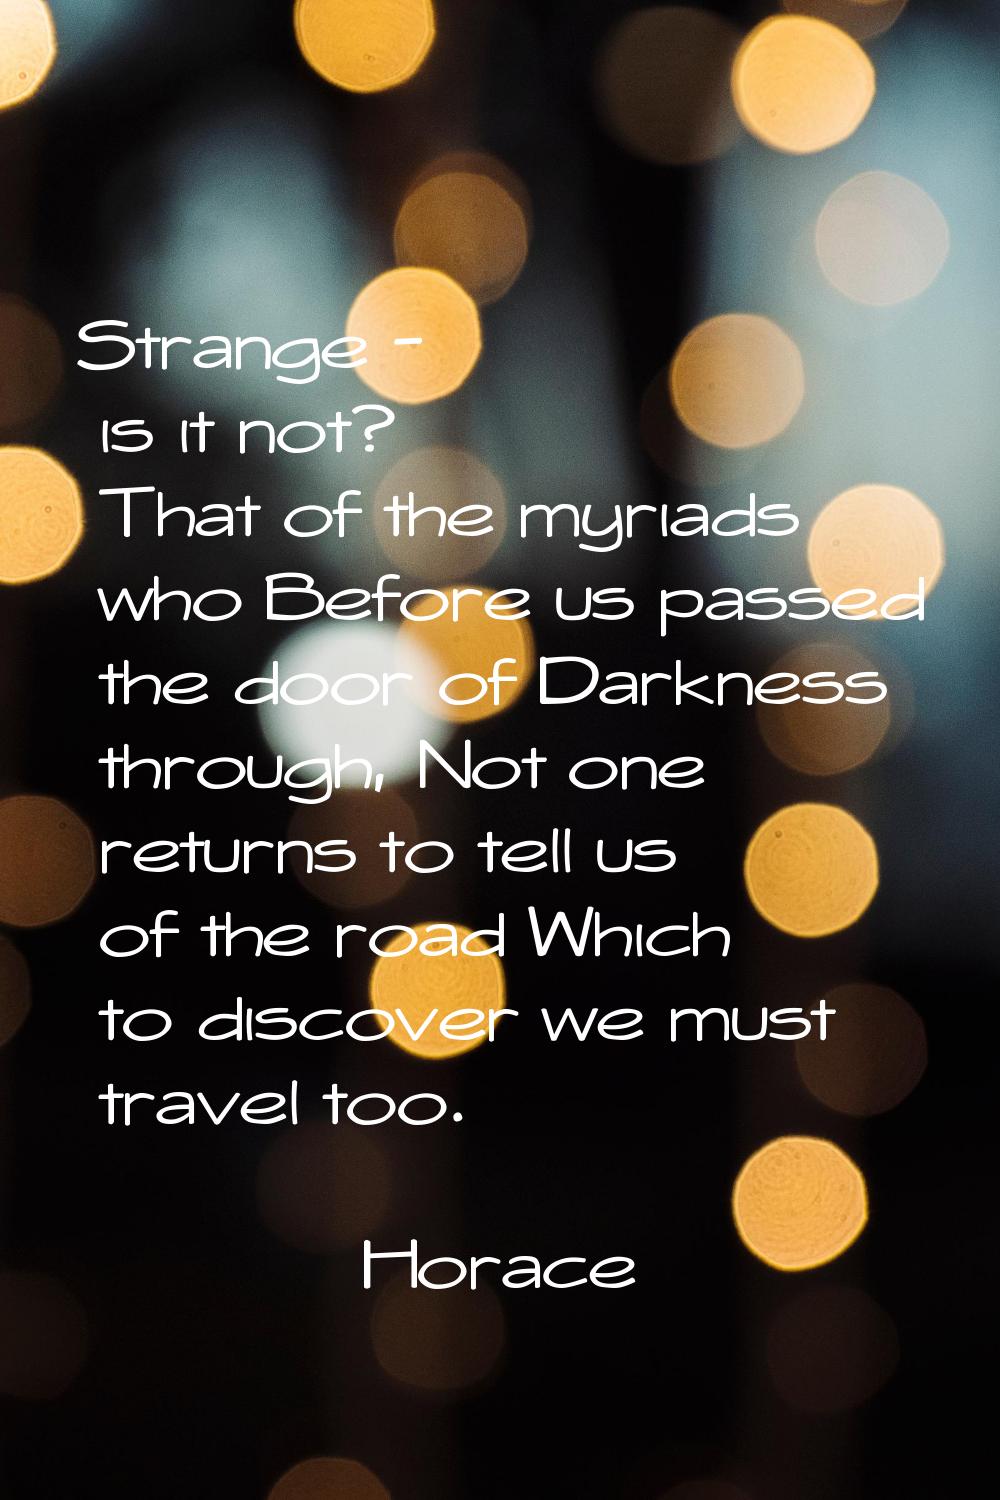 Strange - is it not? That of the myriads who Before us passed the door of Darkness through, Not one